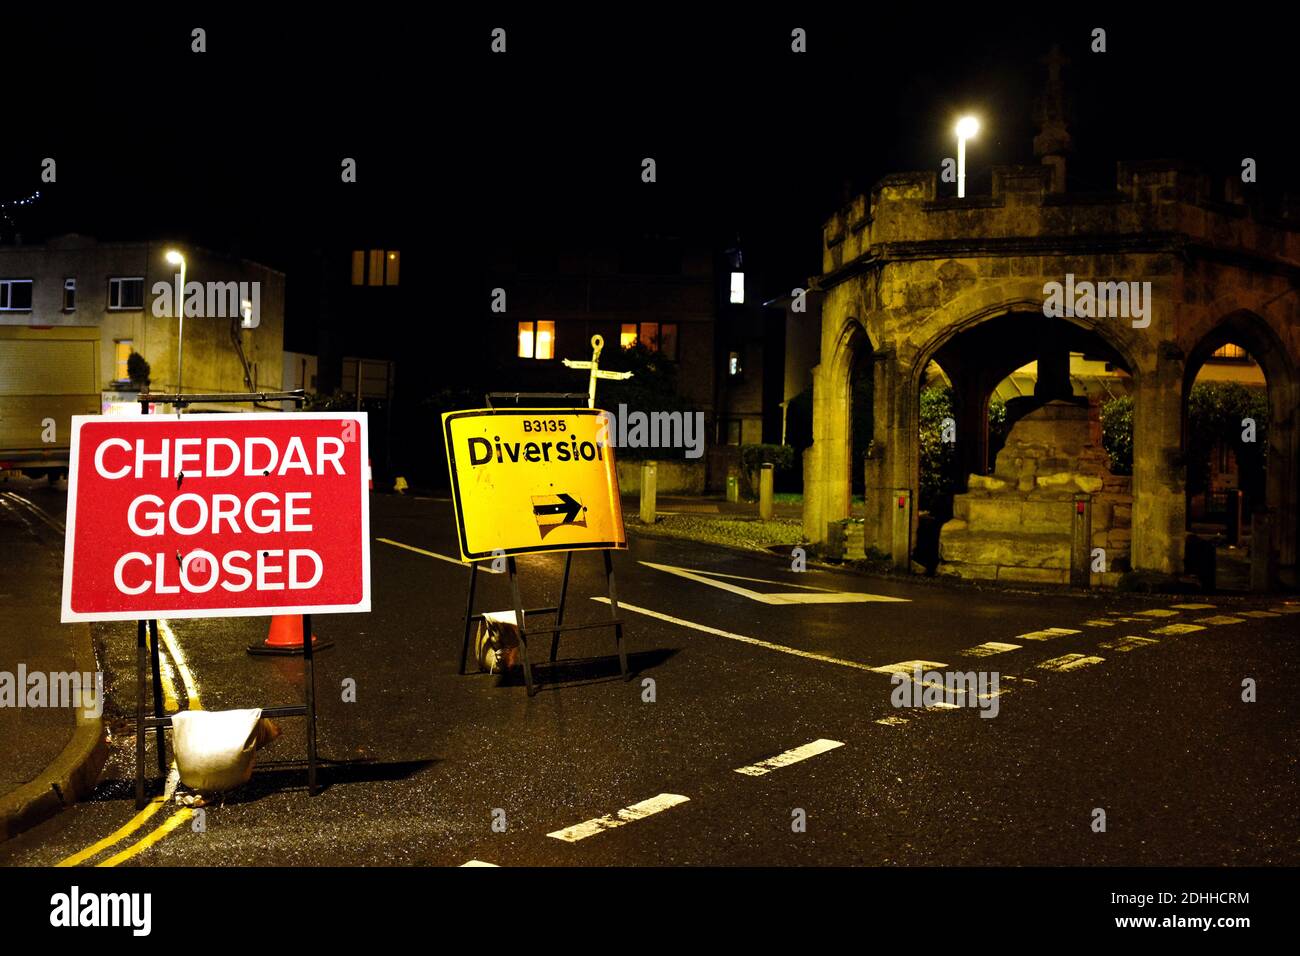 December 2020 - Sign for shutting of the gorge road for tree maintenance work in Cheddar Somerset, UK Stock Photo